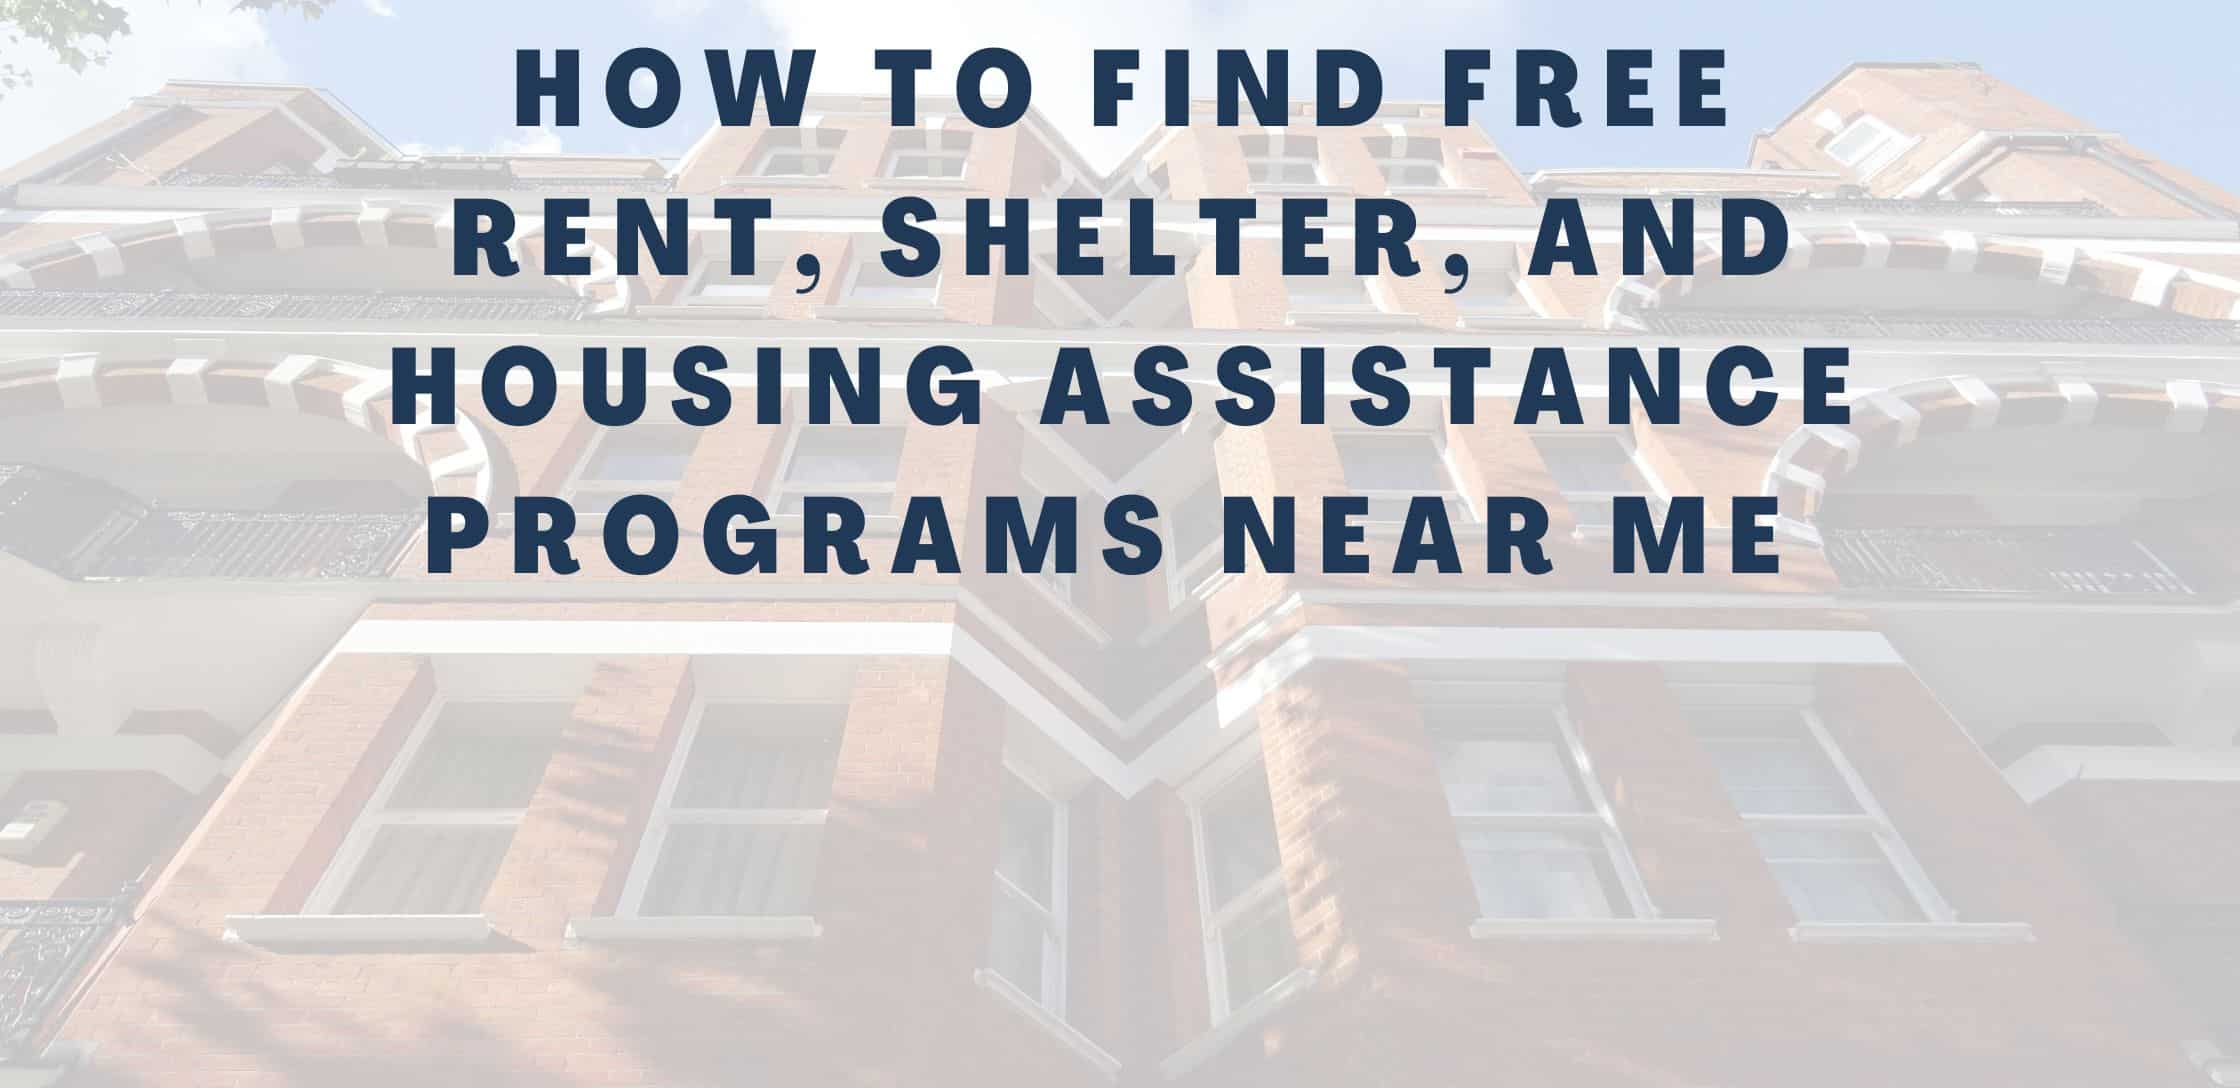 How to Find Free Rent, Shelter, and Housing Assistance Programs Near Me